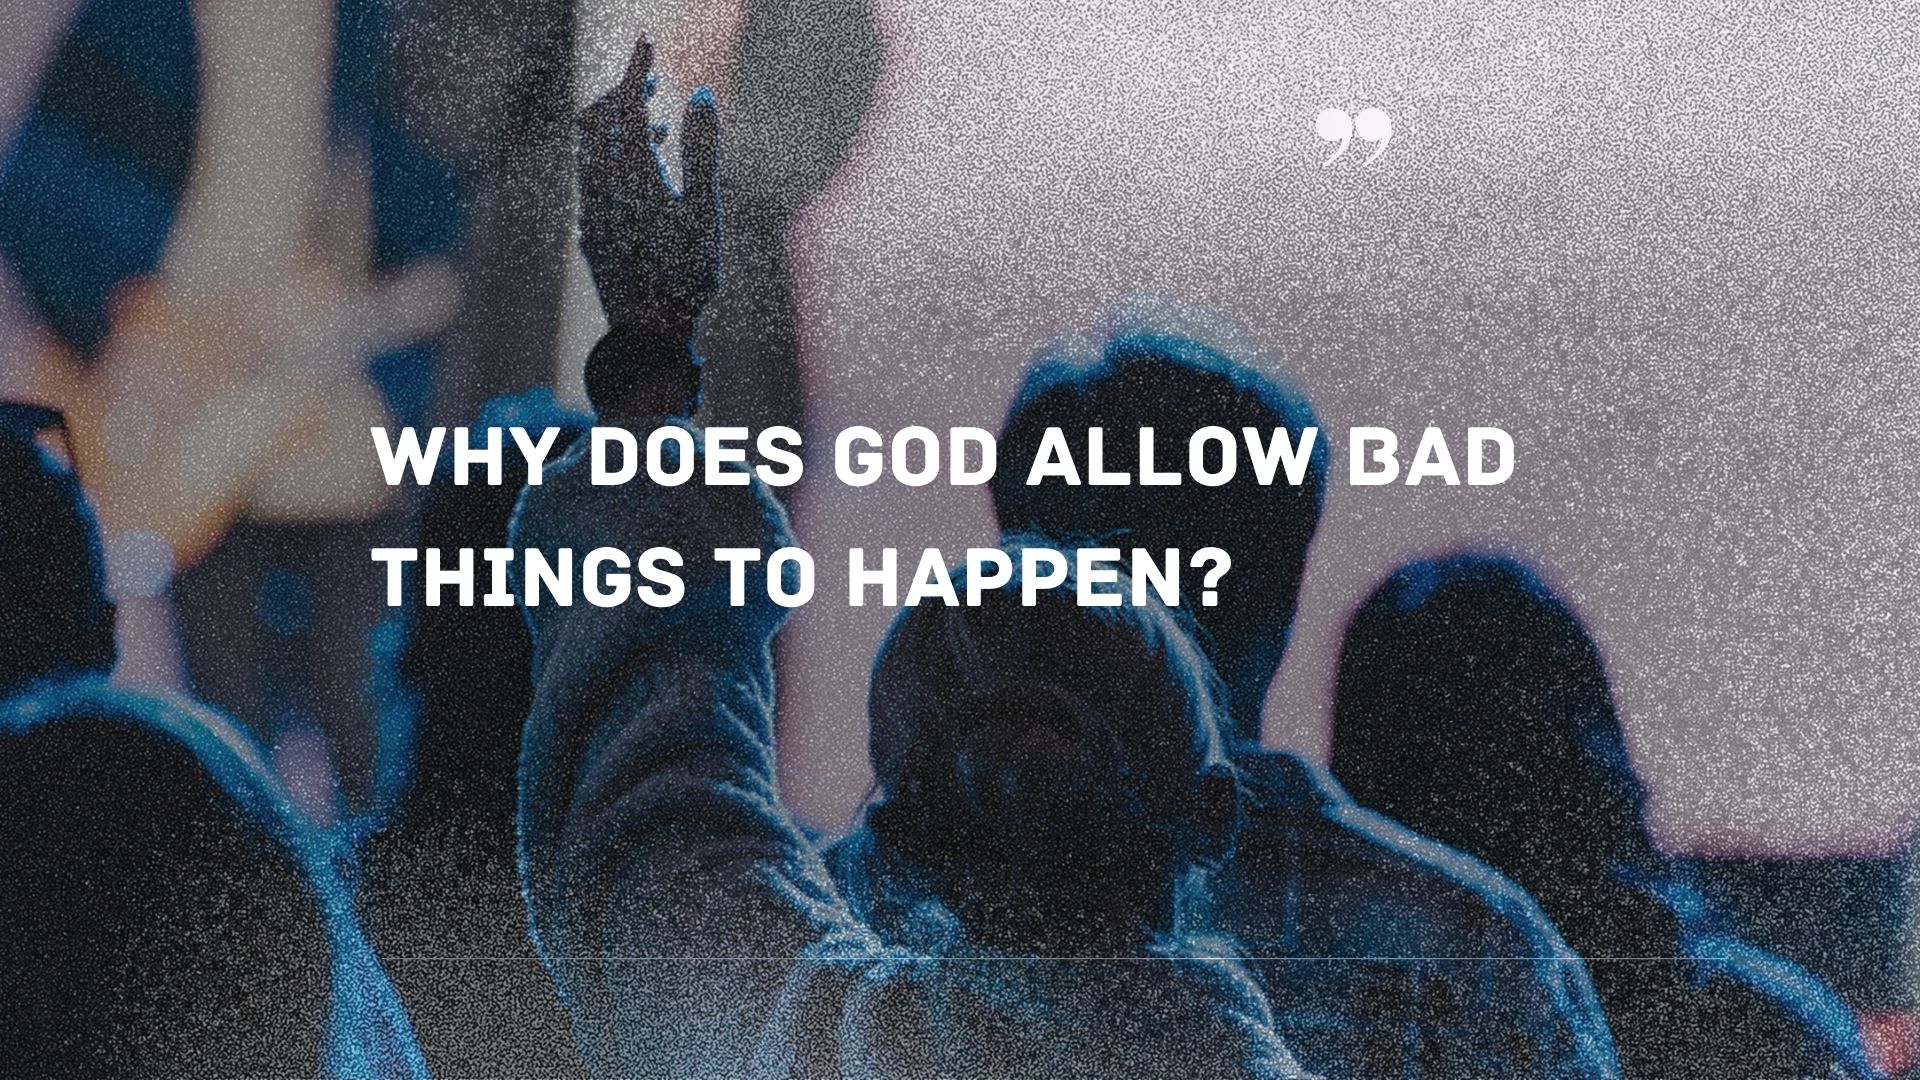 Why does God allow bad things to happen to good people?